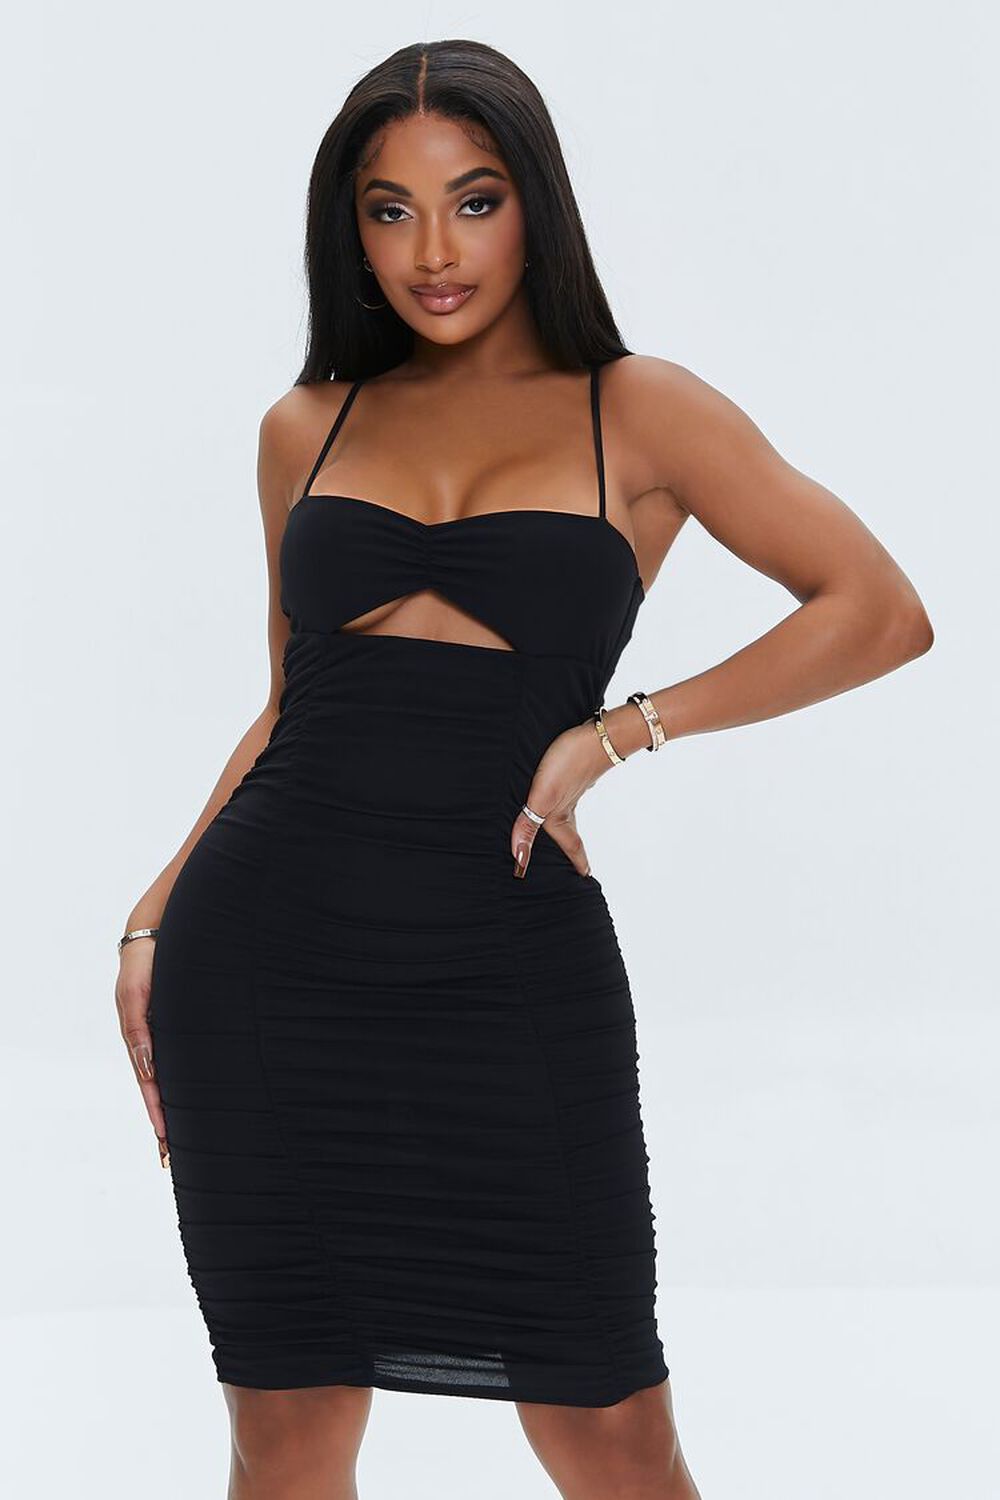 BLACK Ruched Cutout Bodycon Dress, image 1